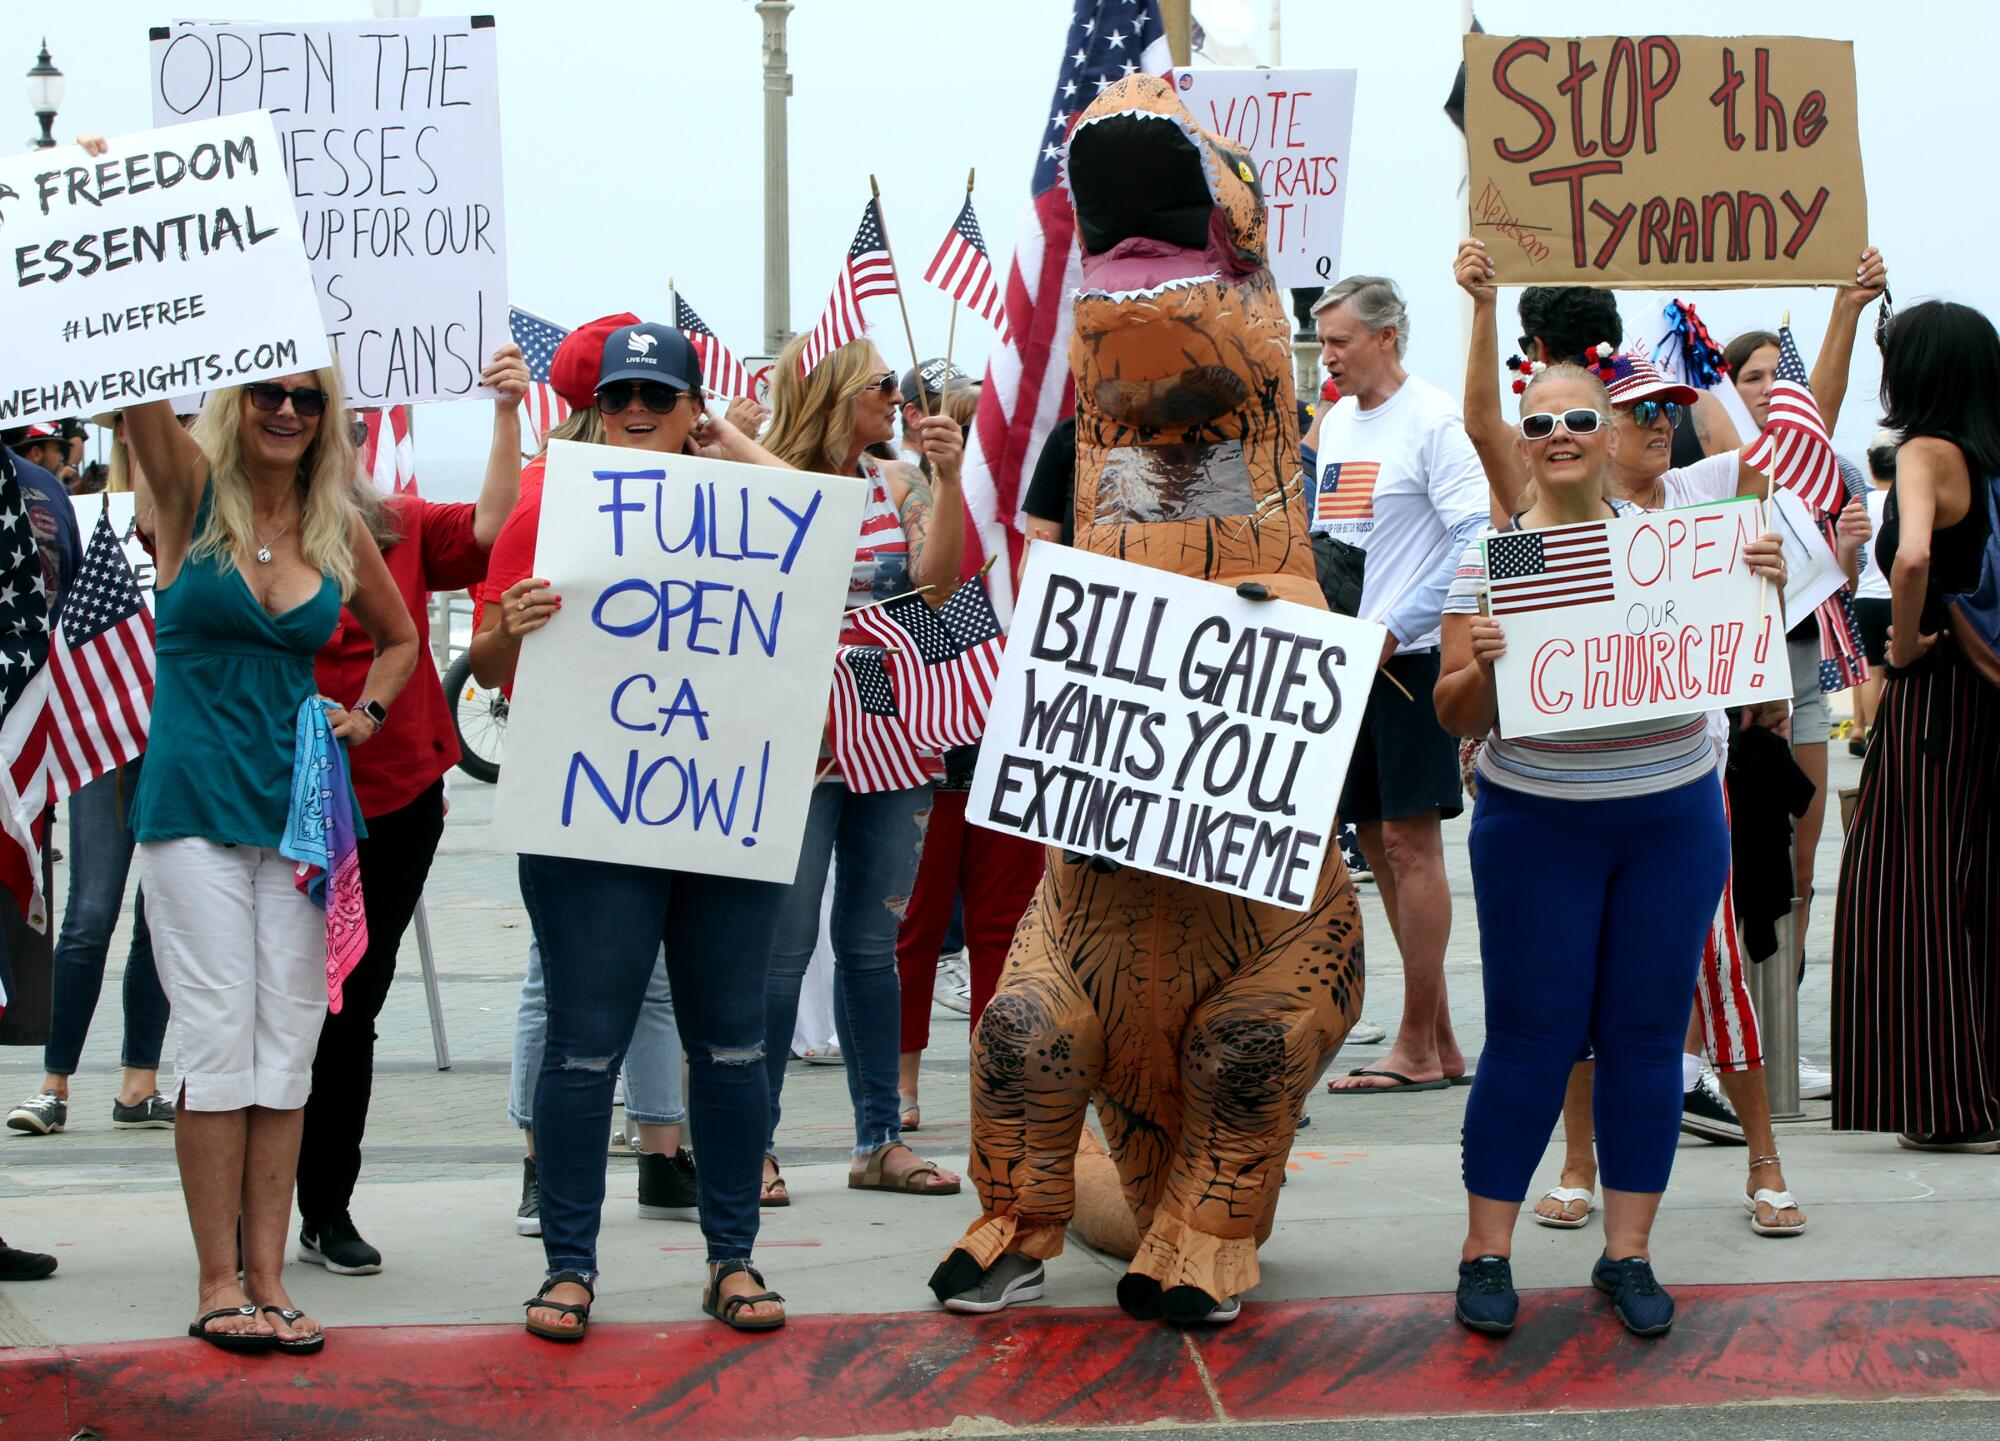 Protesters hold signs with various messages during Saturday's protest to open the state of California at Pier Plaza in Huntington Beach.